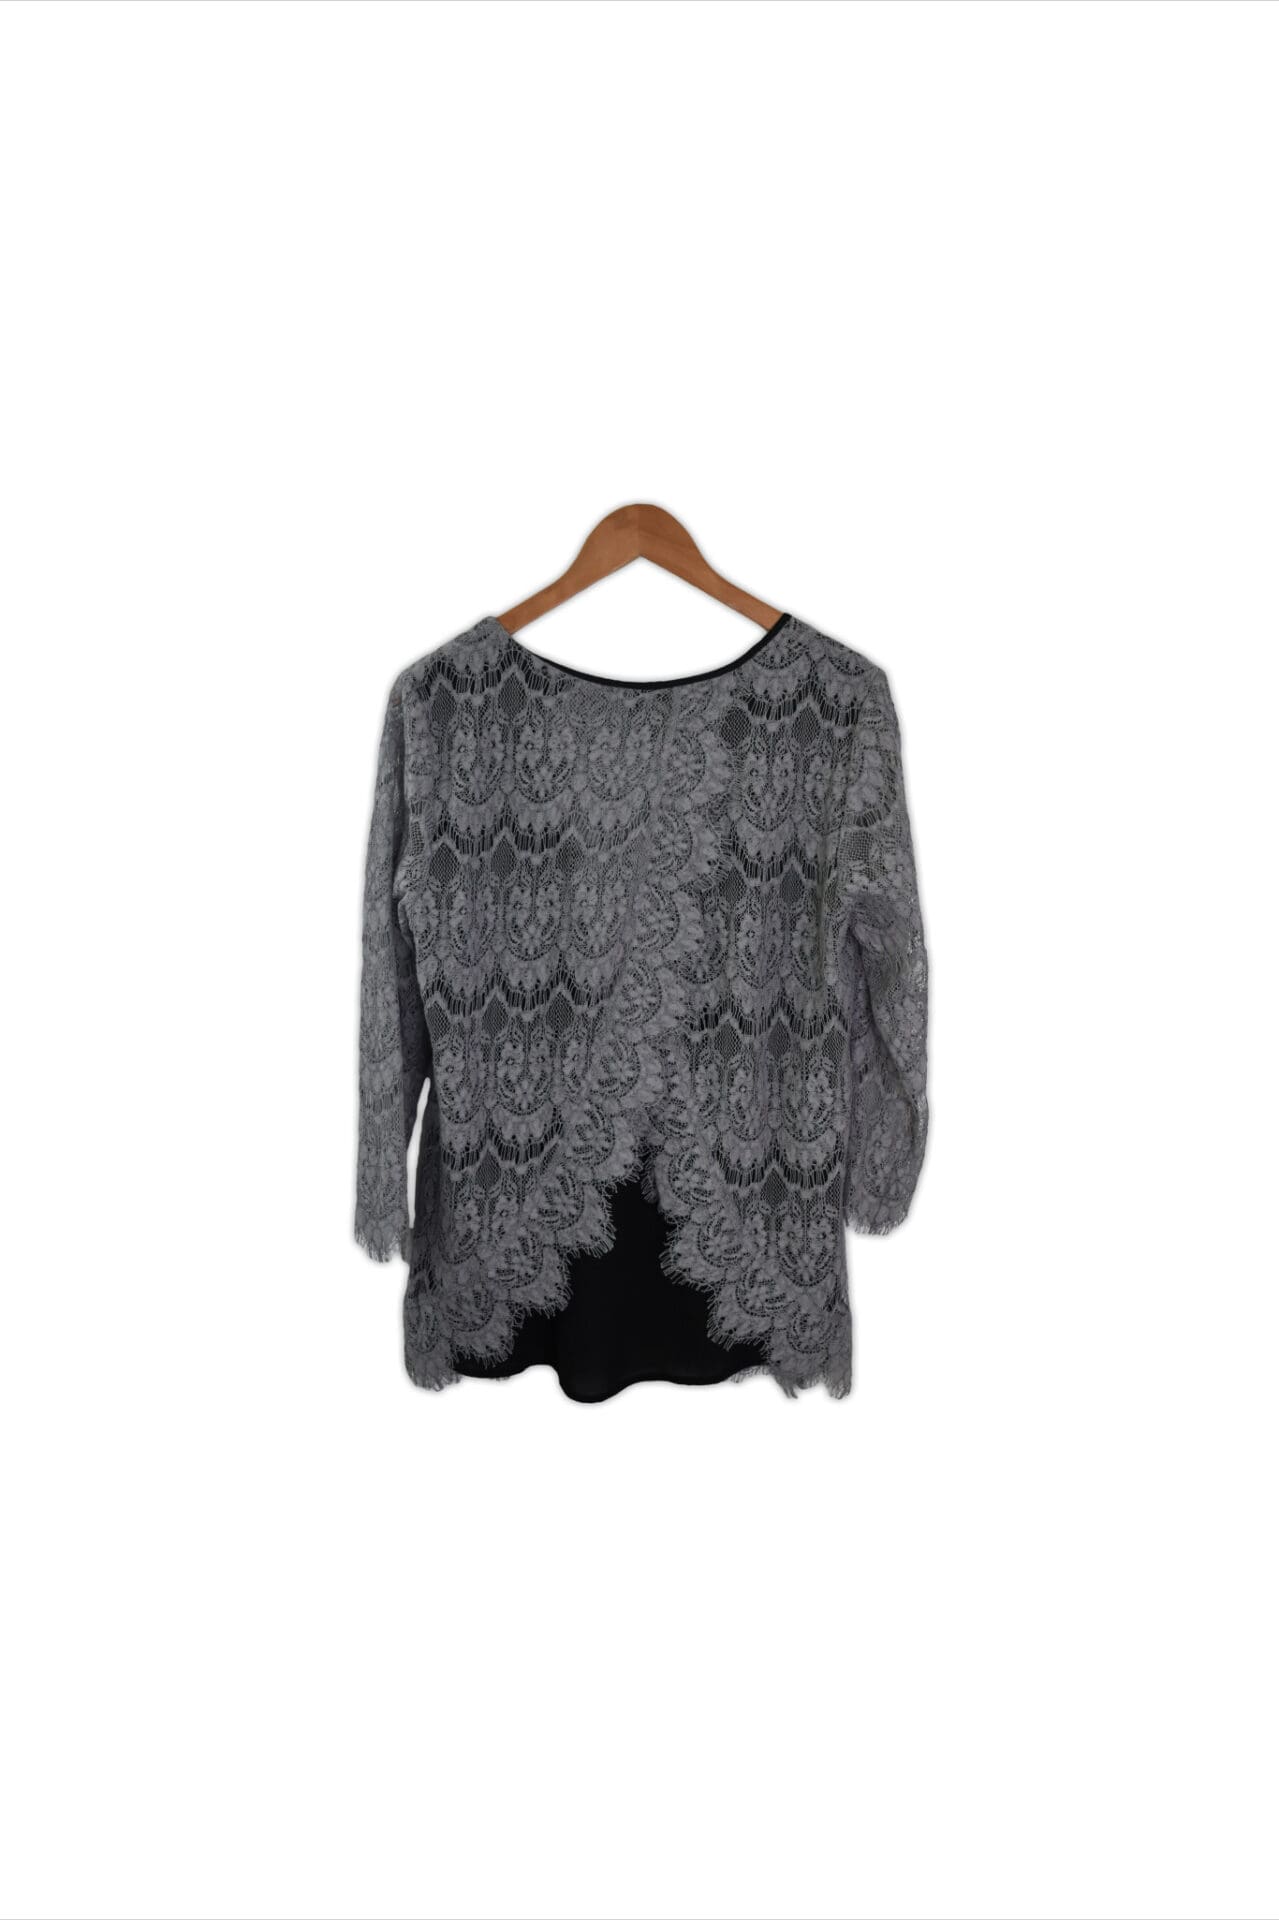 L silver lace 3/4 sleeve top